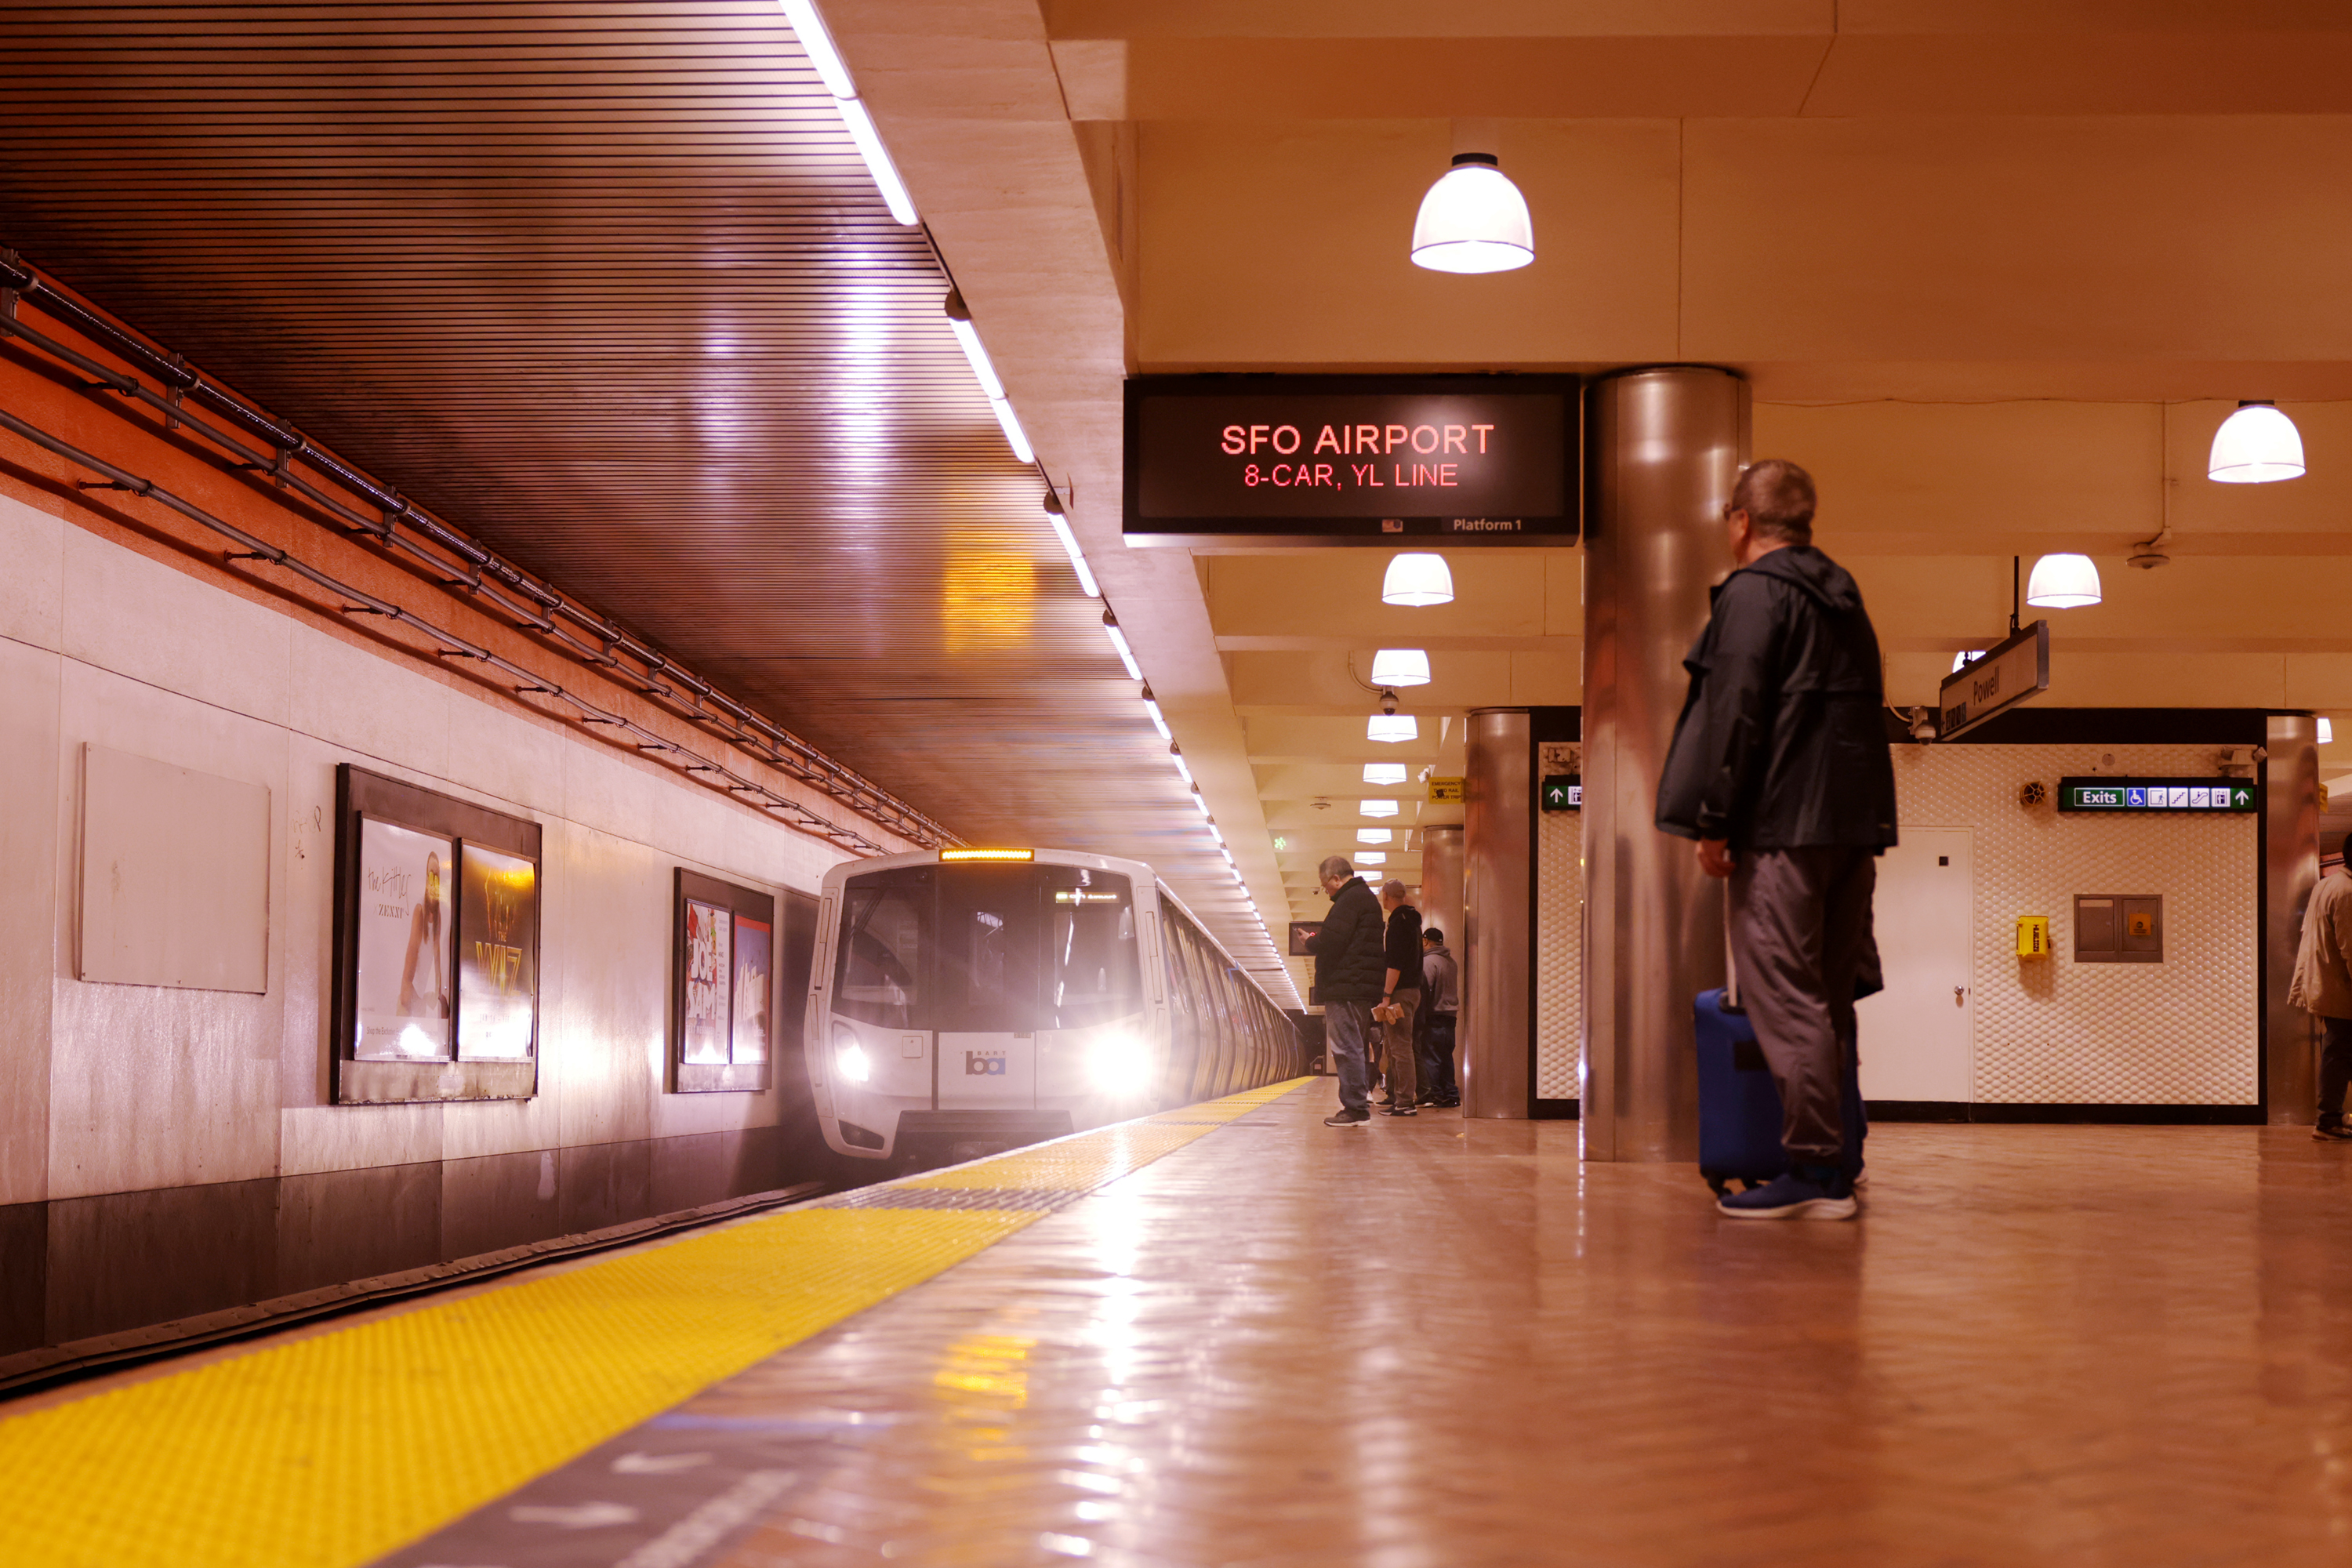 A subway platform with people waiting, a train approaching, and signs indicating the destination as "SFO Airport" on an 8-car Yellow Line.